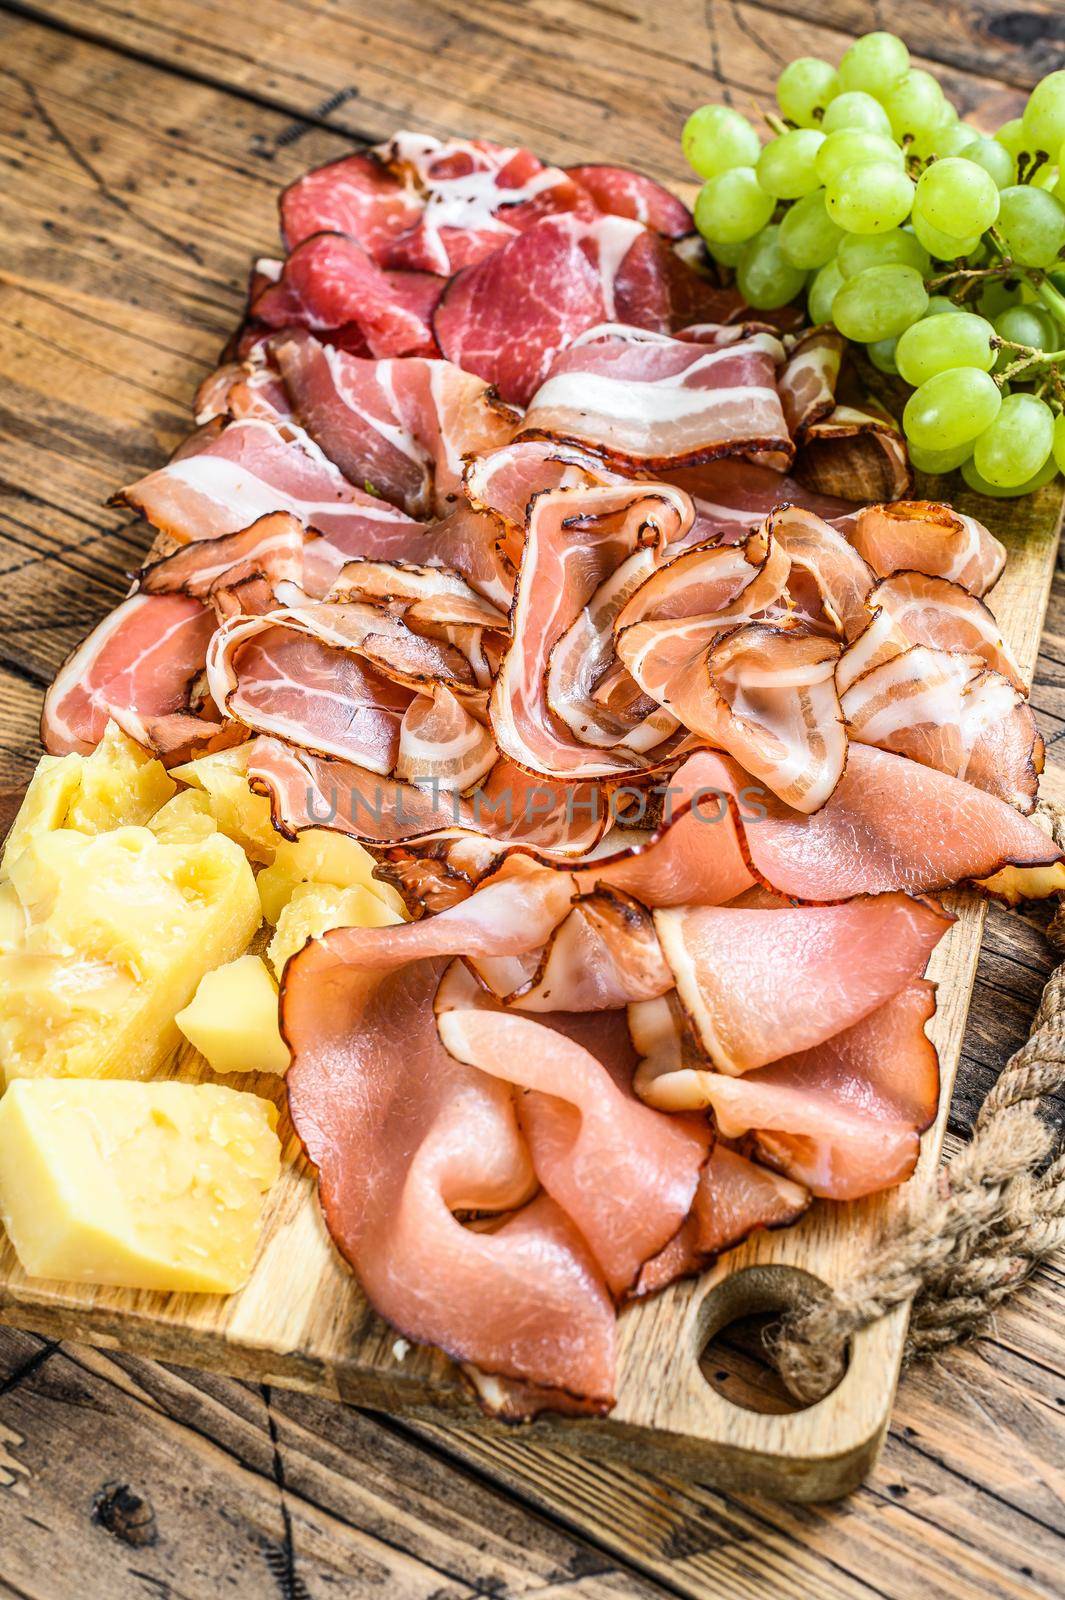 Meat antipasto board, pancetta, salami, sliced ham, sausage, prosciutto, bacon with grape and parmesan cheese. Wooden background. Top view.